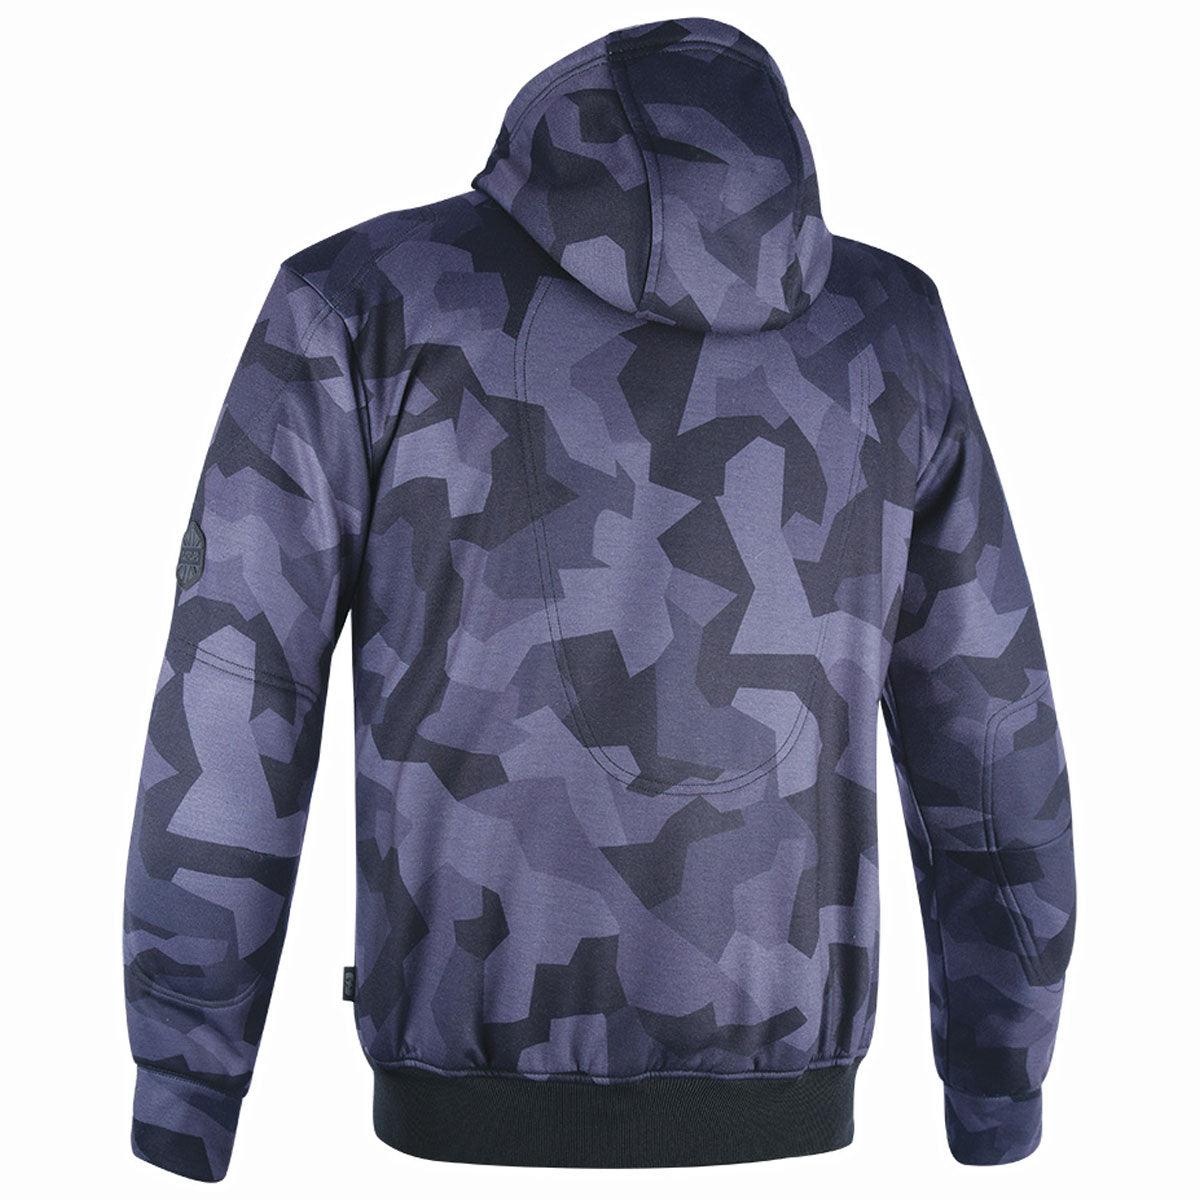 Oxford Super Hoodie 2.0 - Grey Camo - Browse our range of Clothing: Hoodies - getgearedshop 